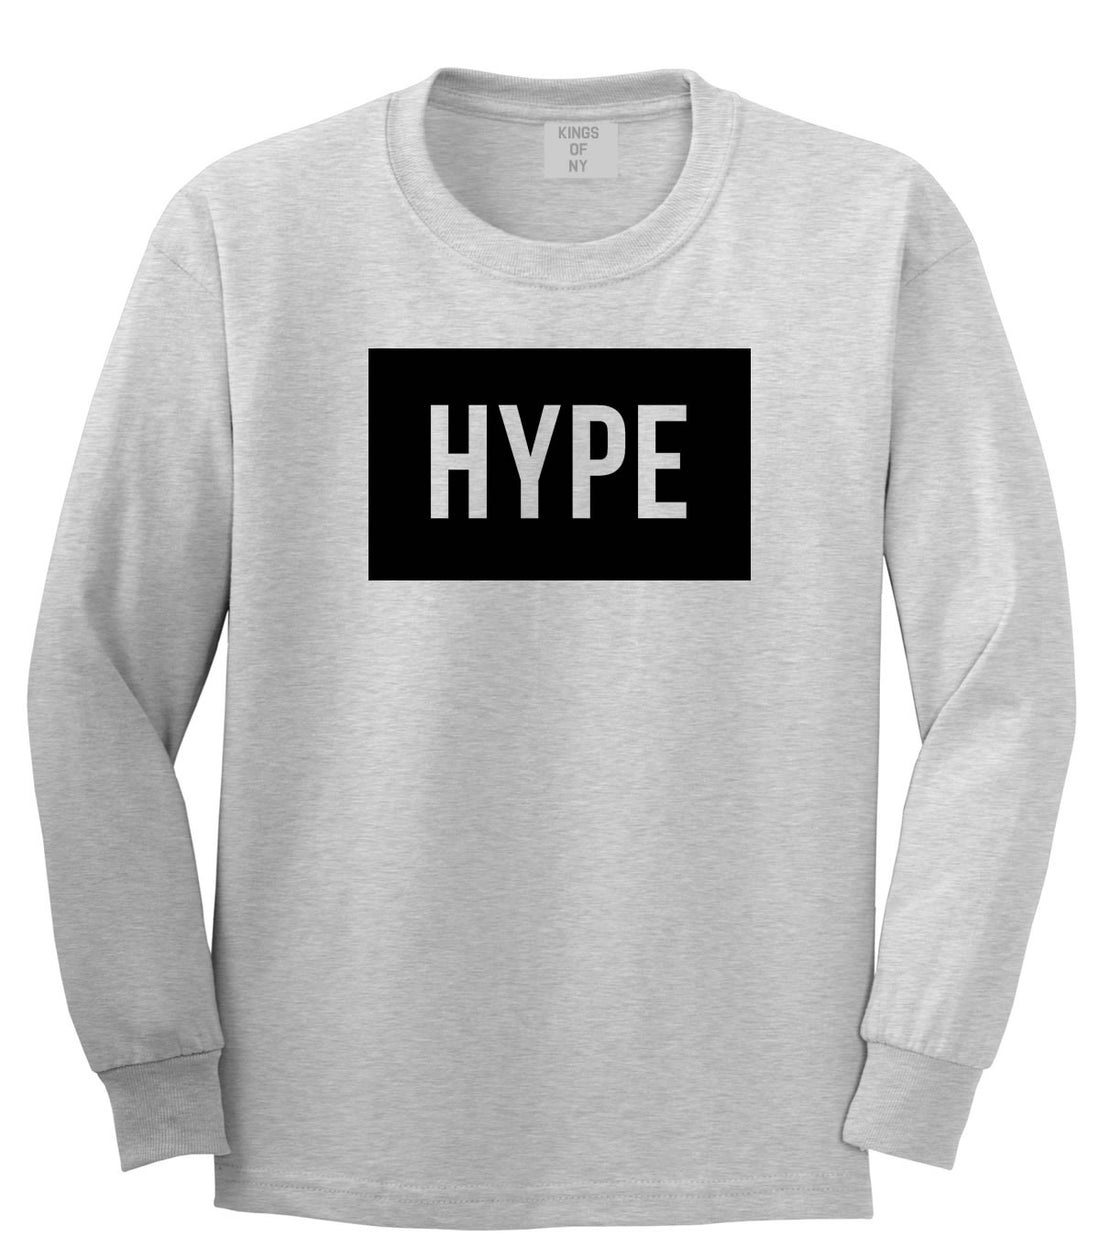 Hype Style Streetwear Brand Logo White by Kings Of NY Long Sleeve T-Shirt In Grey by Kings Of NY